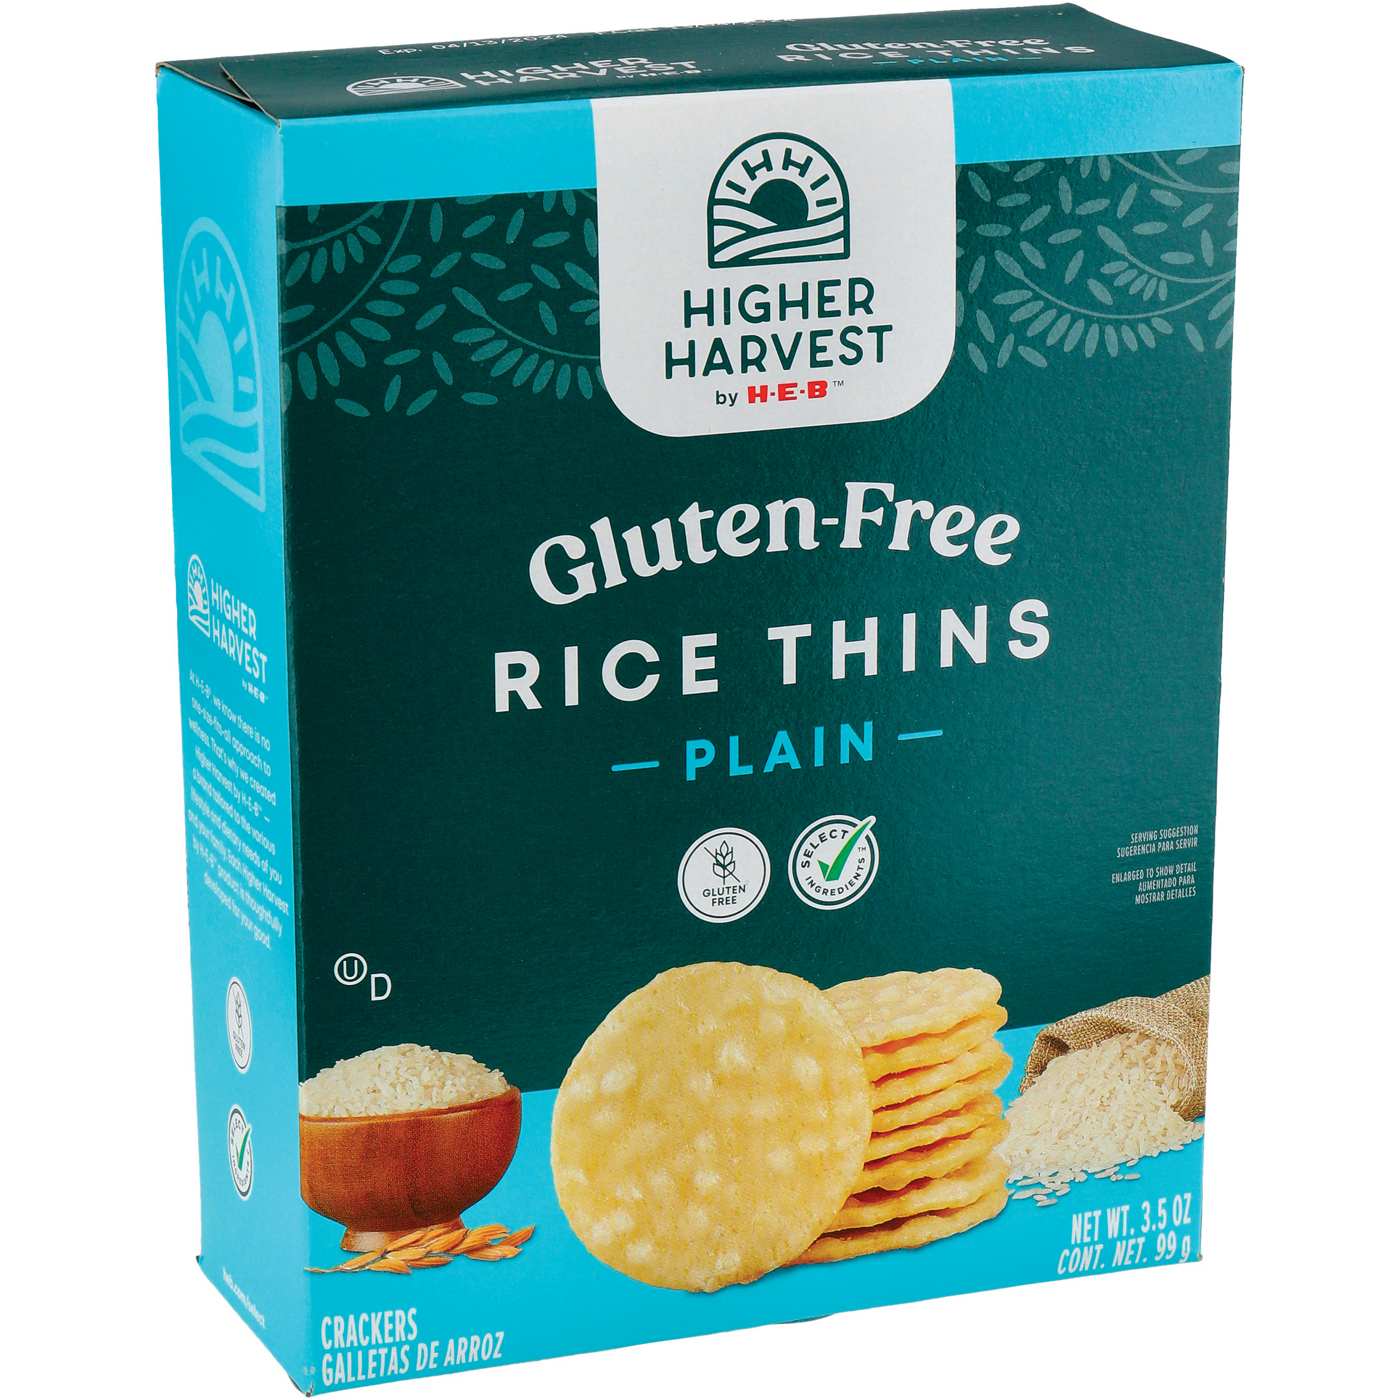 Higher Harvest by H-E-B Gluten-Free Rice Thins - Plain; image 3 of 3